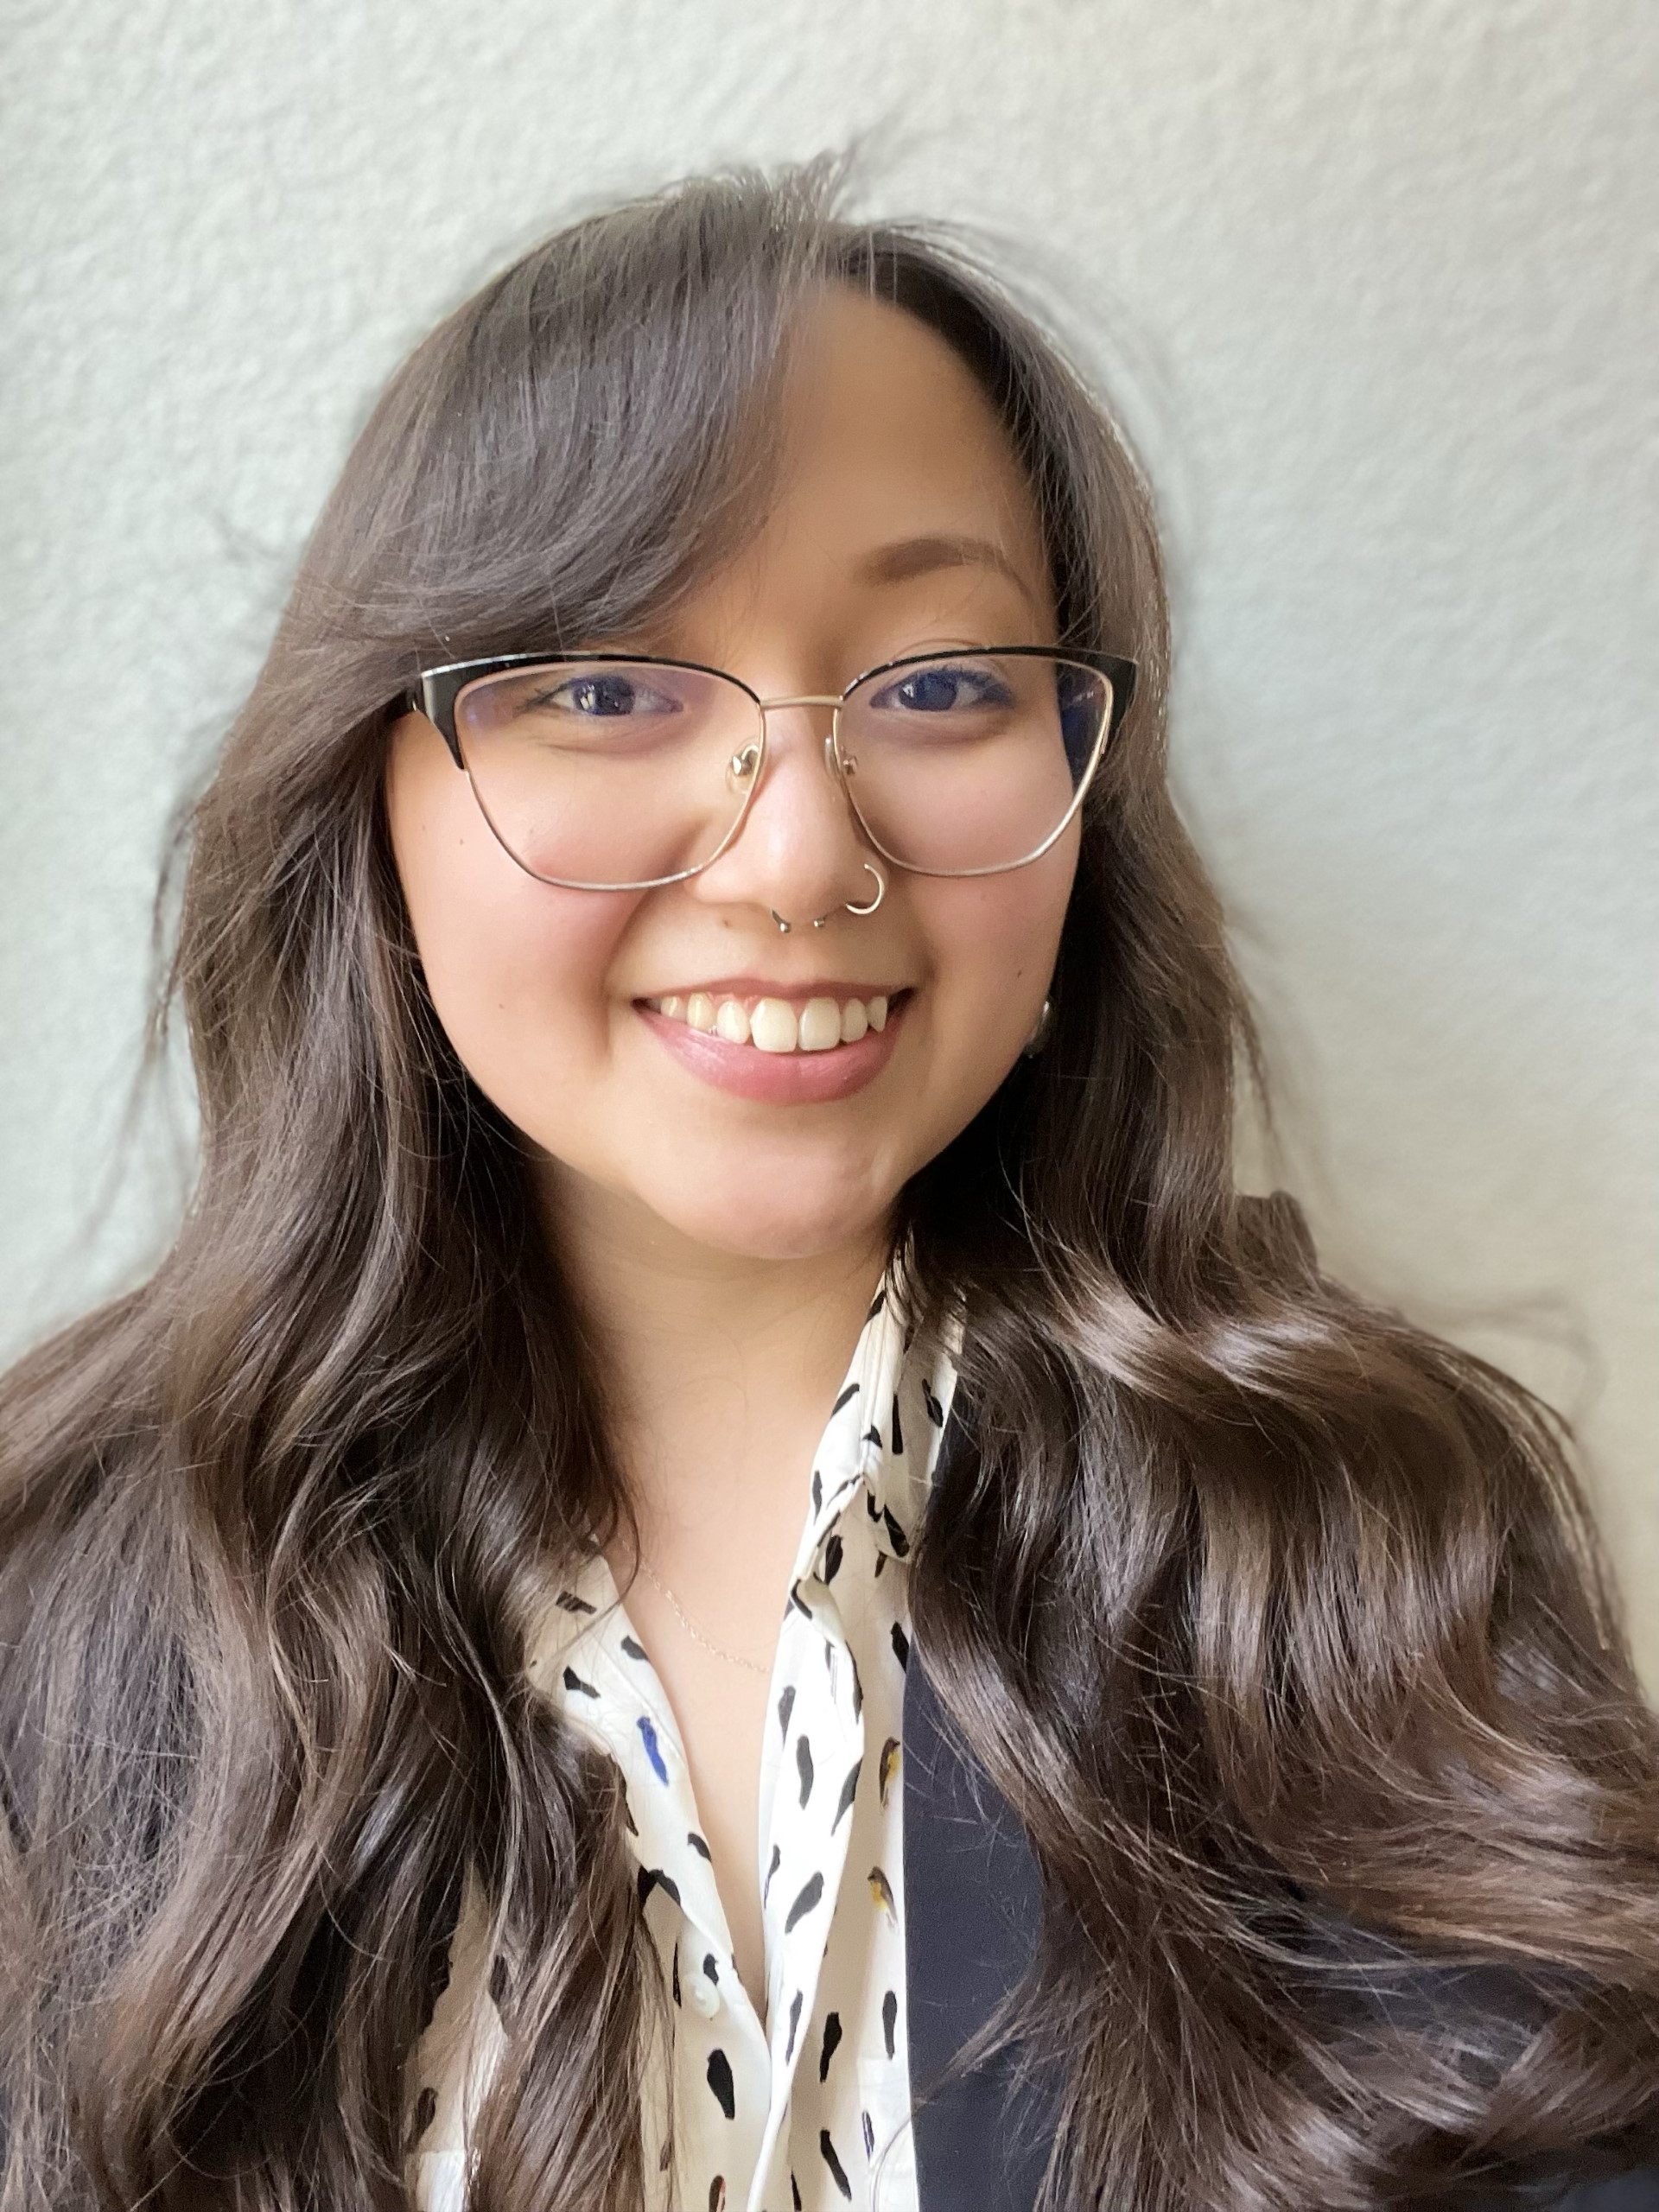 This photo contains a person who is a multiracial woman with light brown skin with small shades of yellow, long brown hair, a right nostril piercing, and a septum piercing. She is wearing eyeglasses, a white bird print blouse, and a black blazer. She is smiling at the camera in front of a white background.